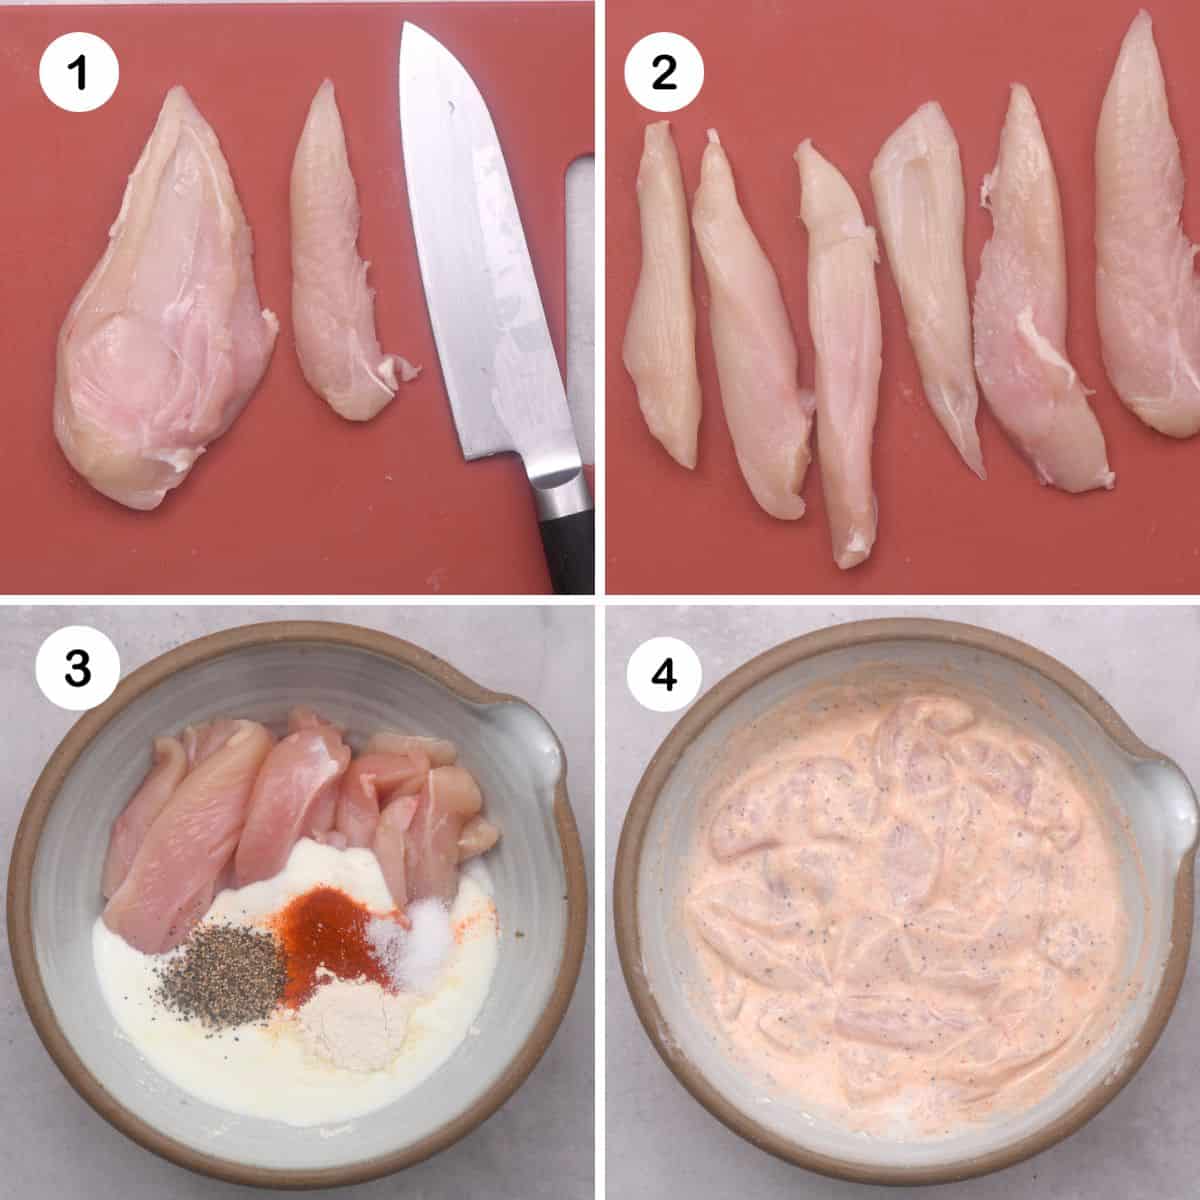 Steps for cutting and marinating chicken tenders